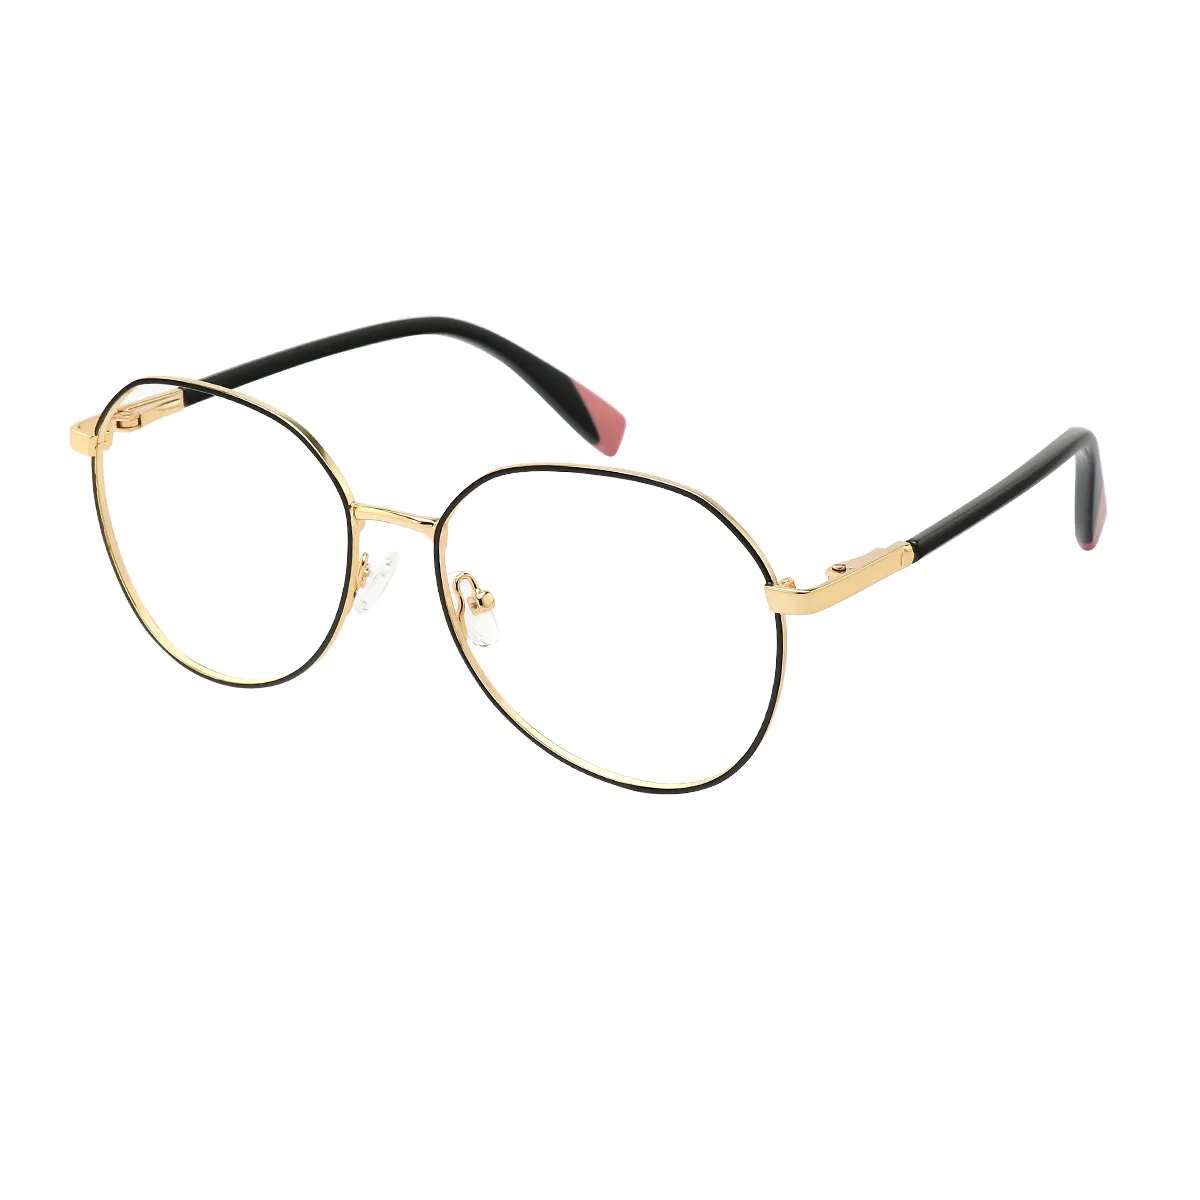 Way Round Black/Gold Reading Glasses for Women